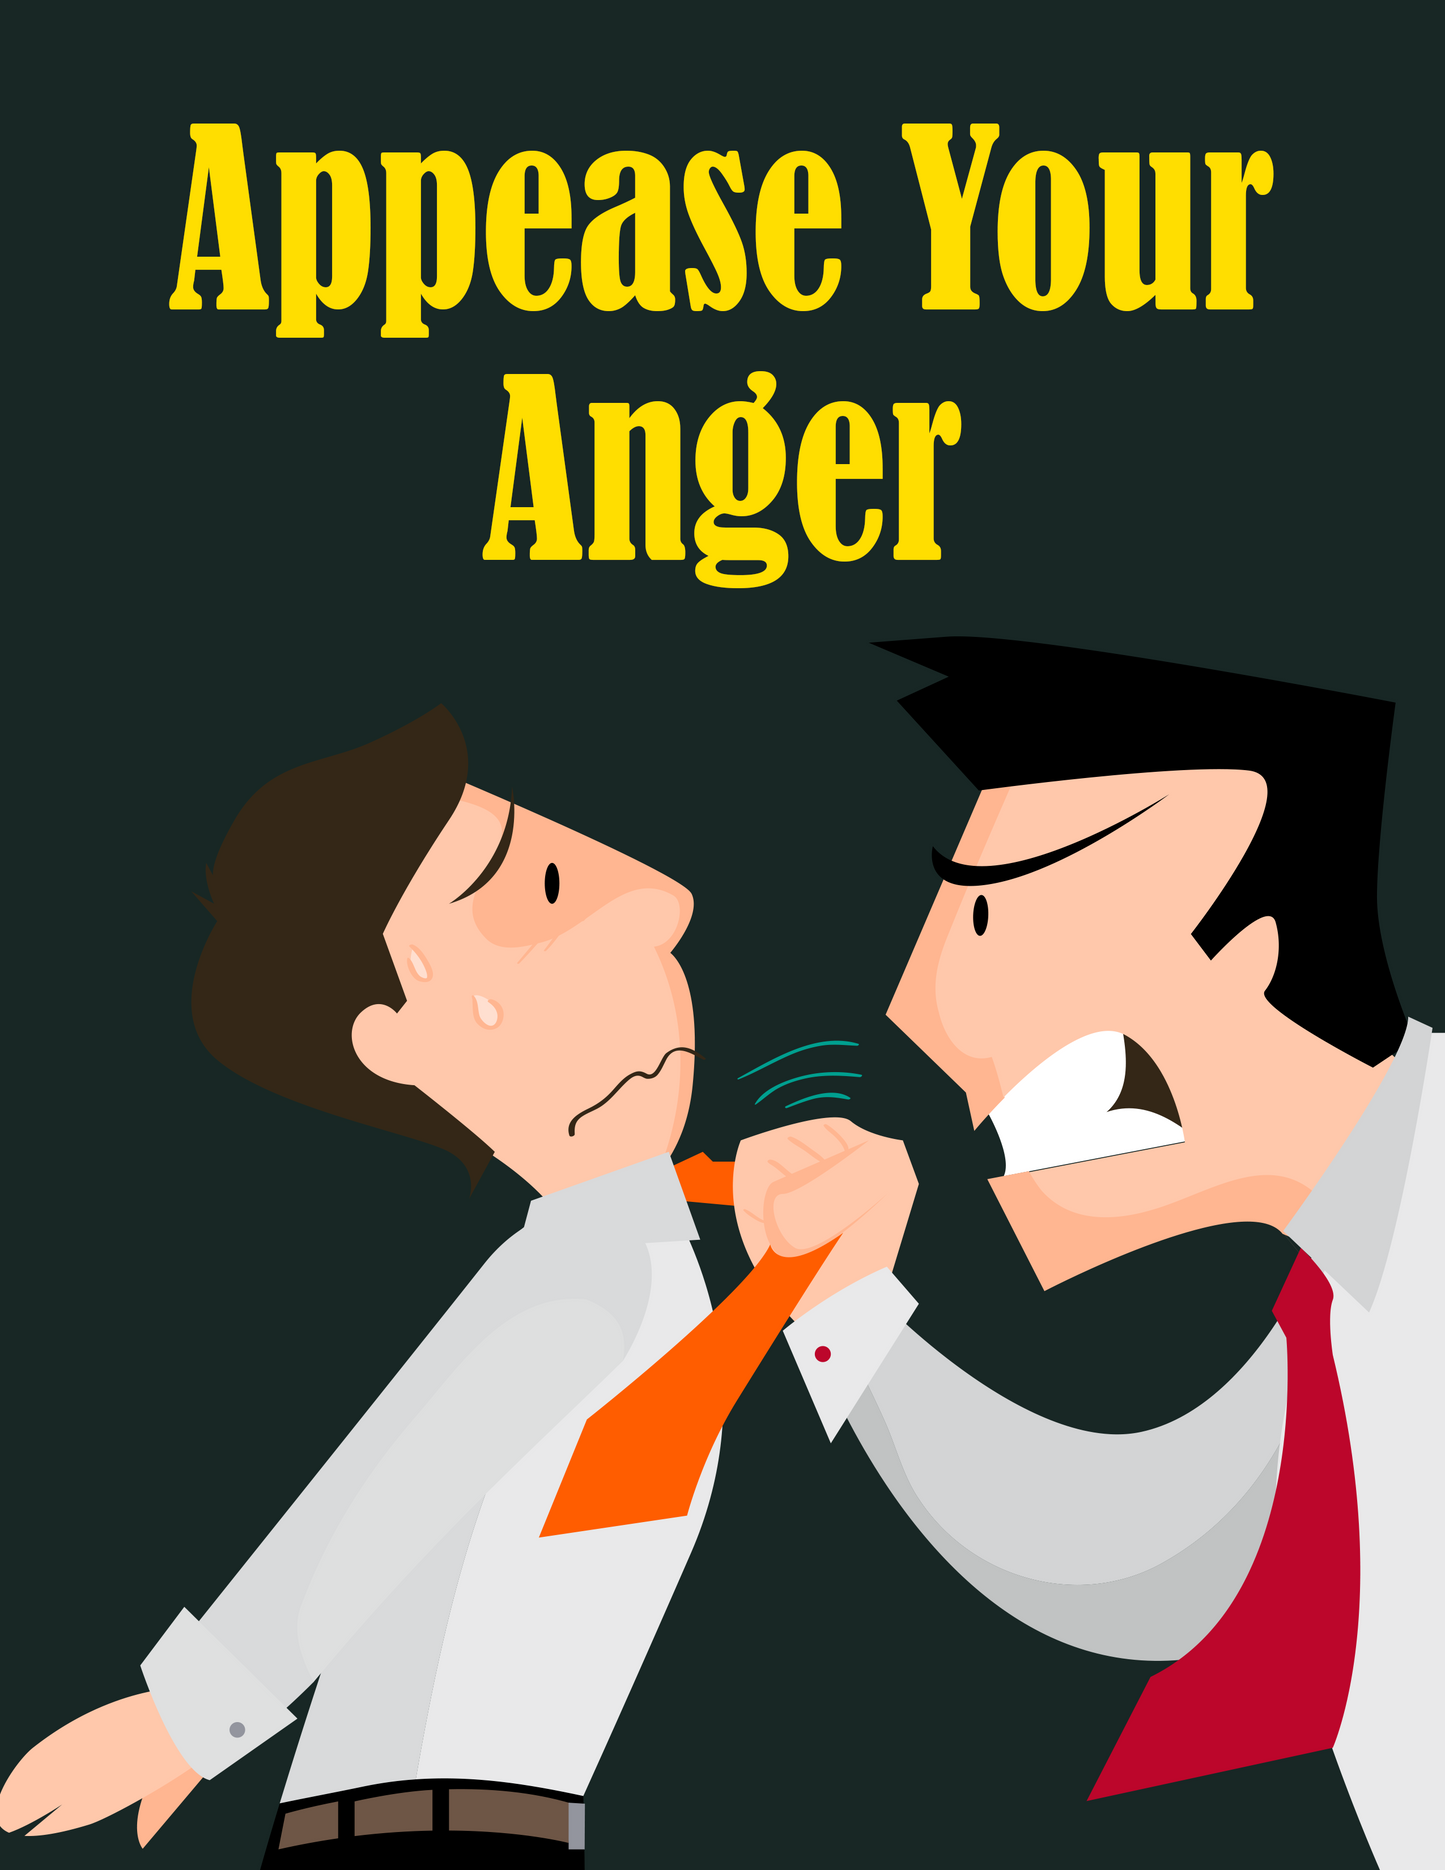 Appease Your Anger